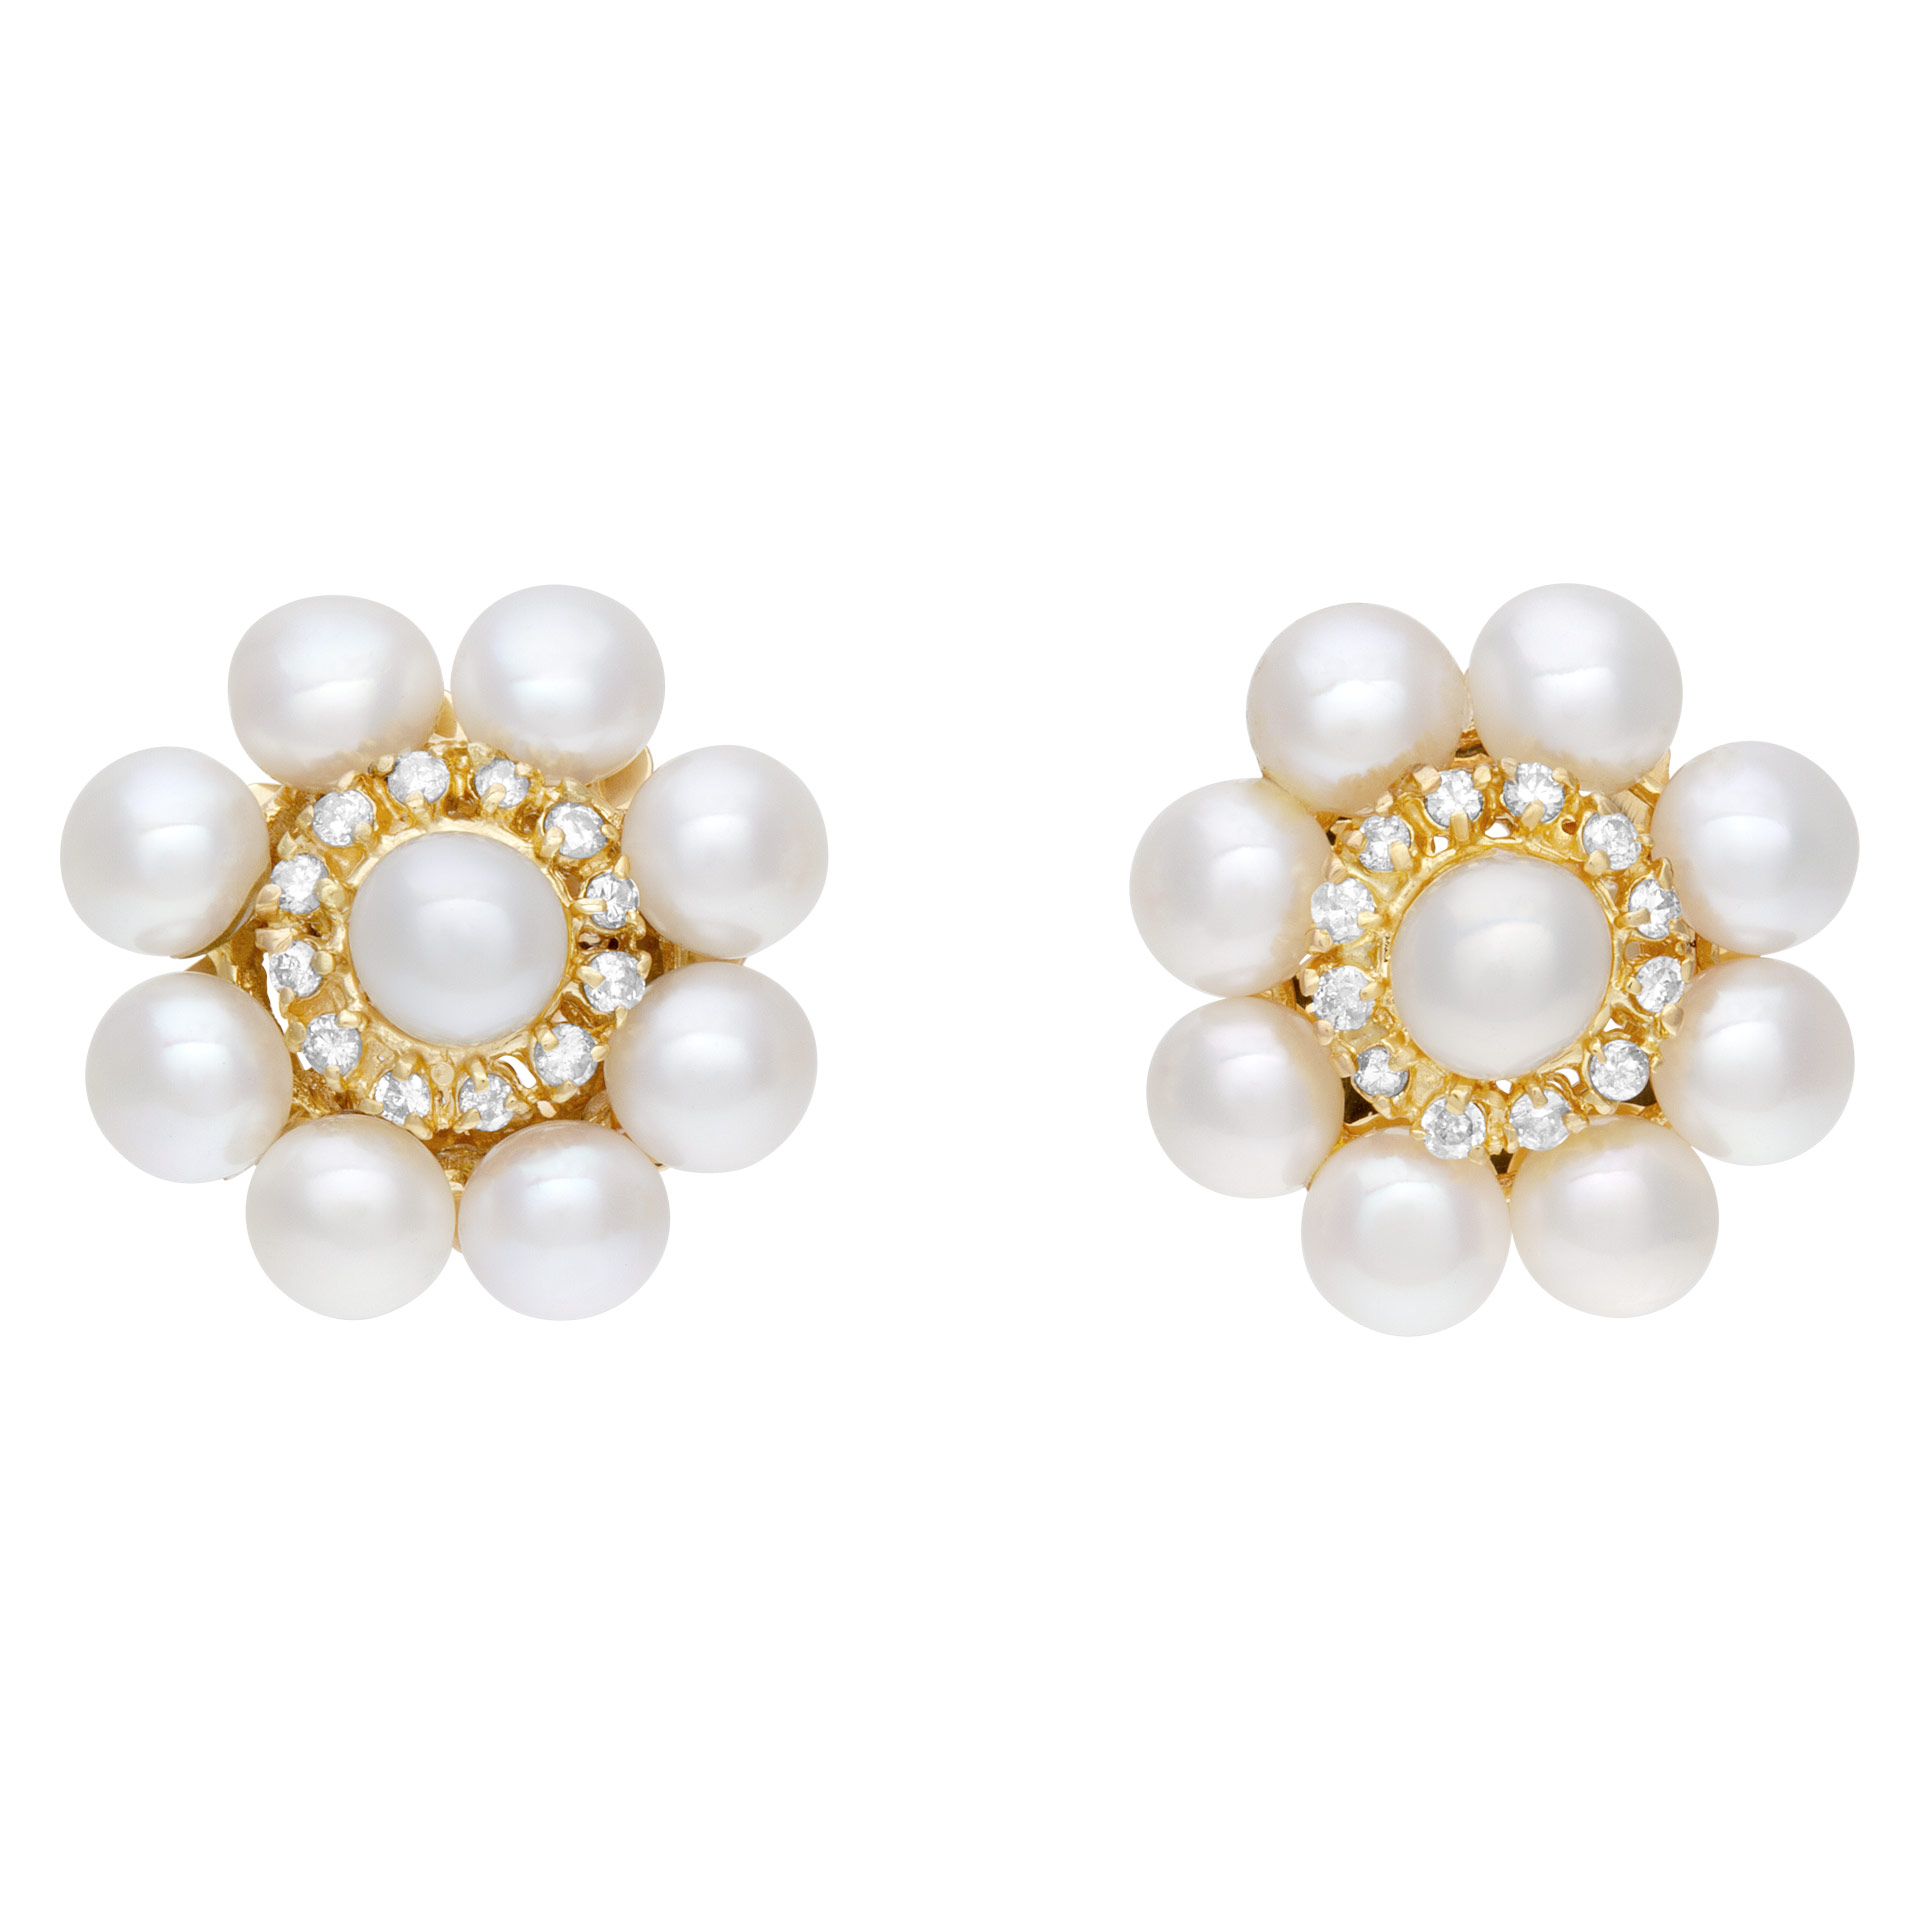 Elegant pair of pearl earrings with diamonds accents, set in 18K yellow gold. 20mm diameter. image 1